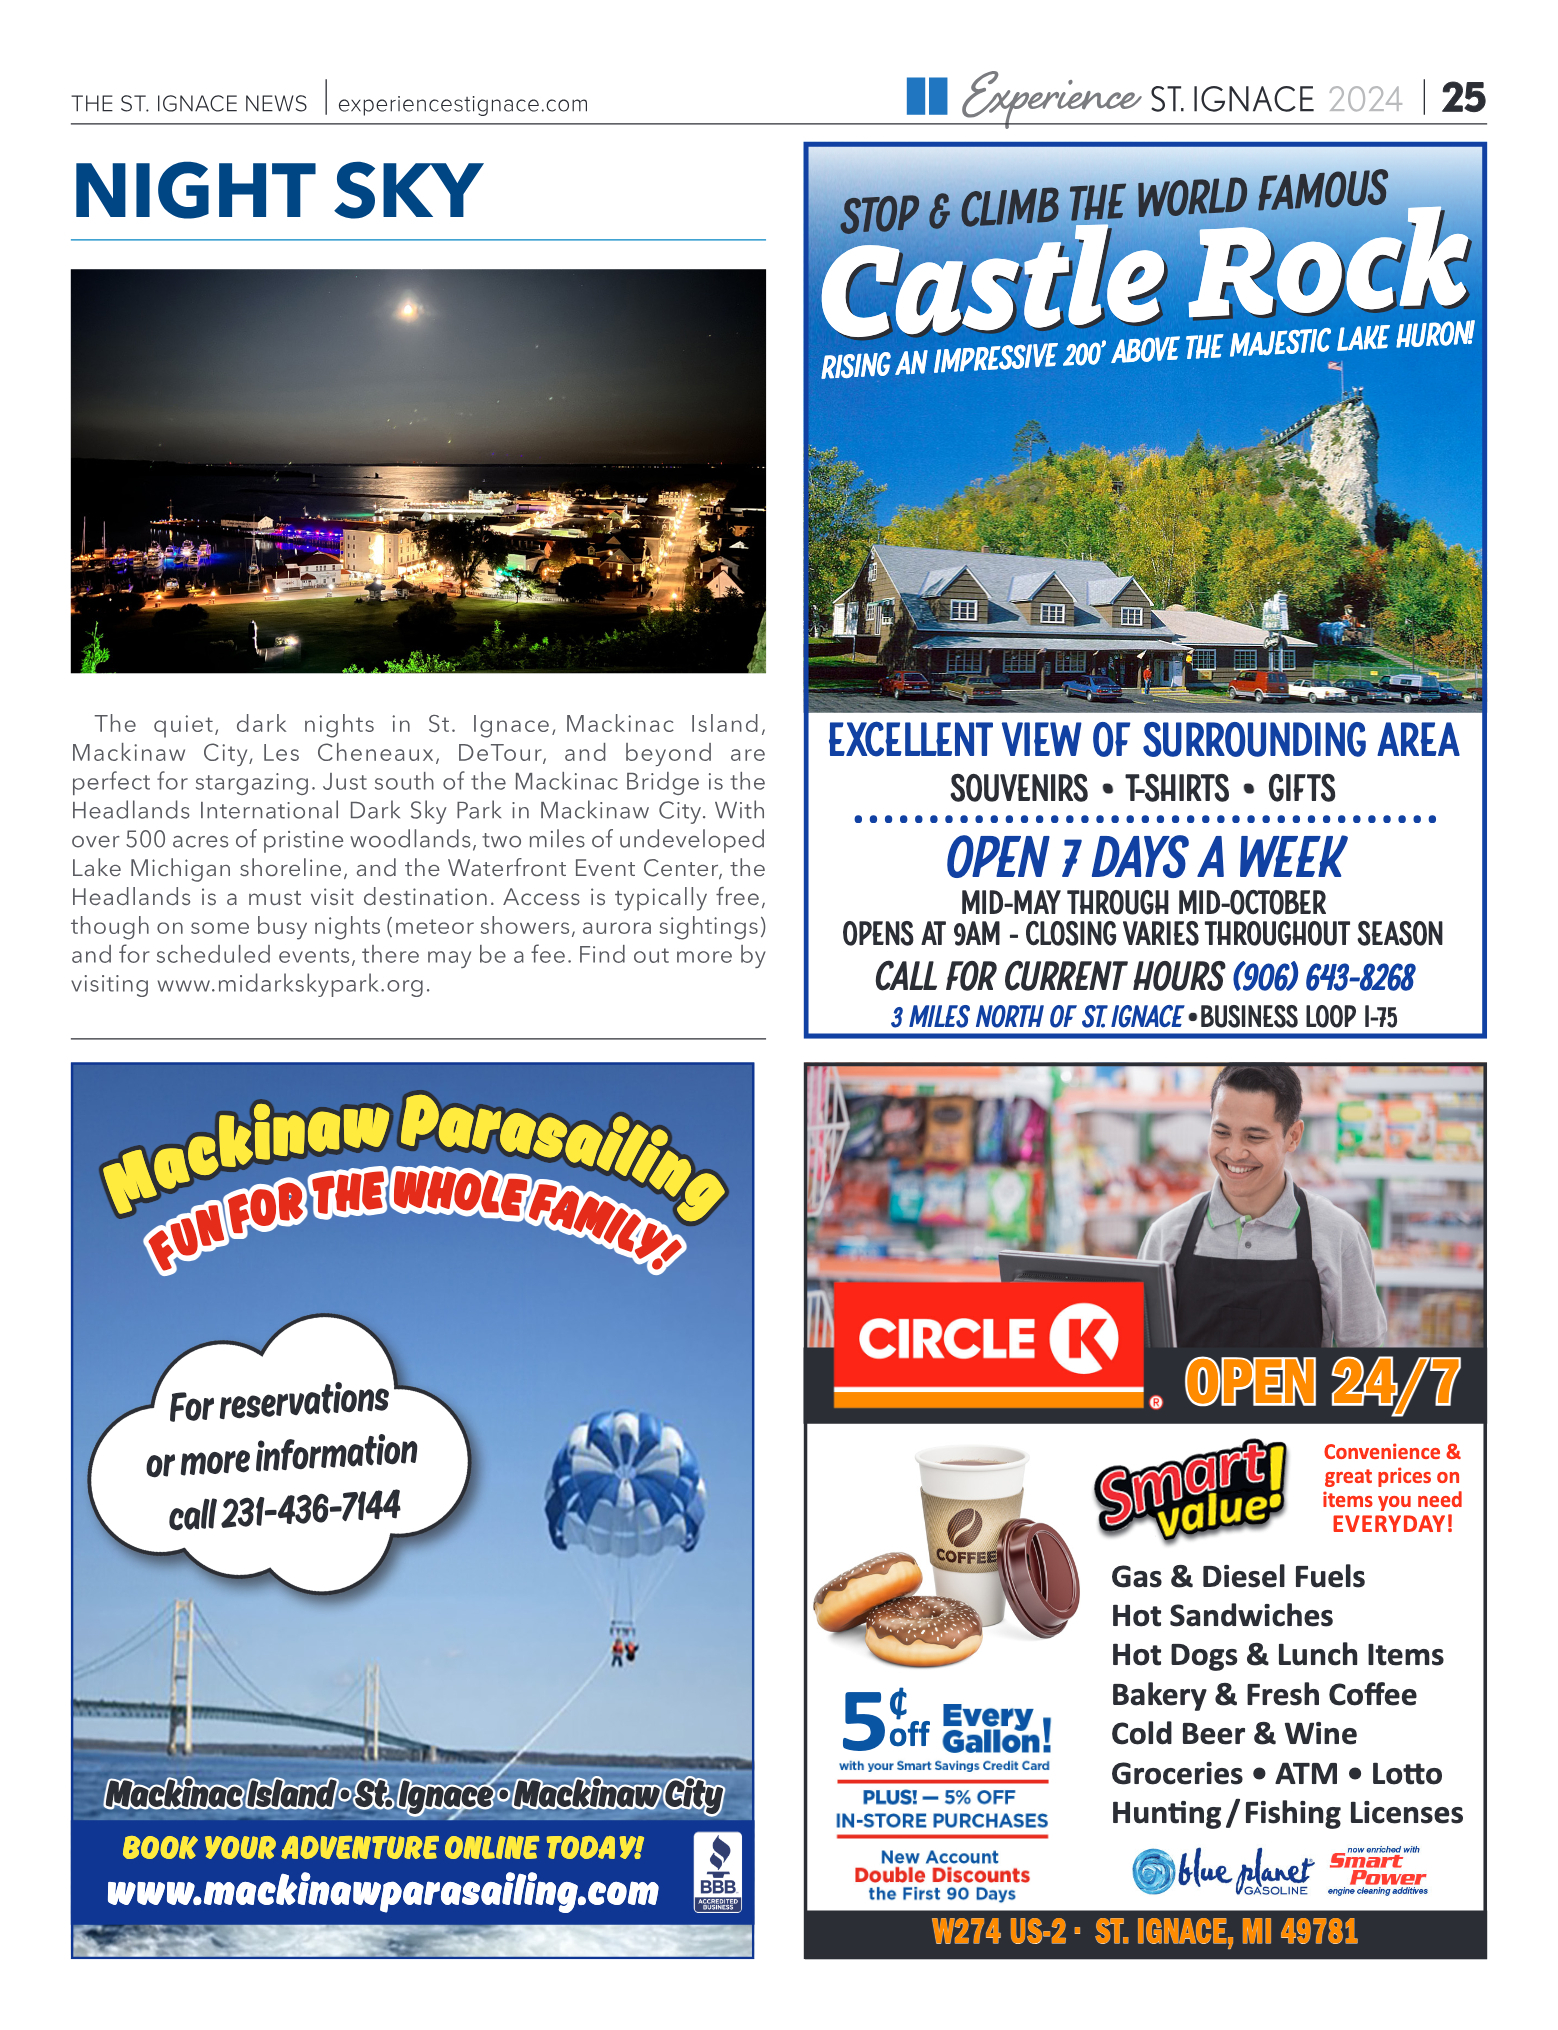 Experience St. Ignace - Guest Travel Guide 2024 - page 25